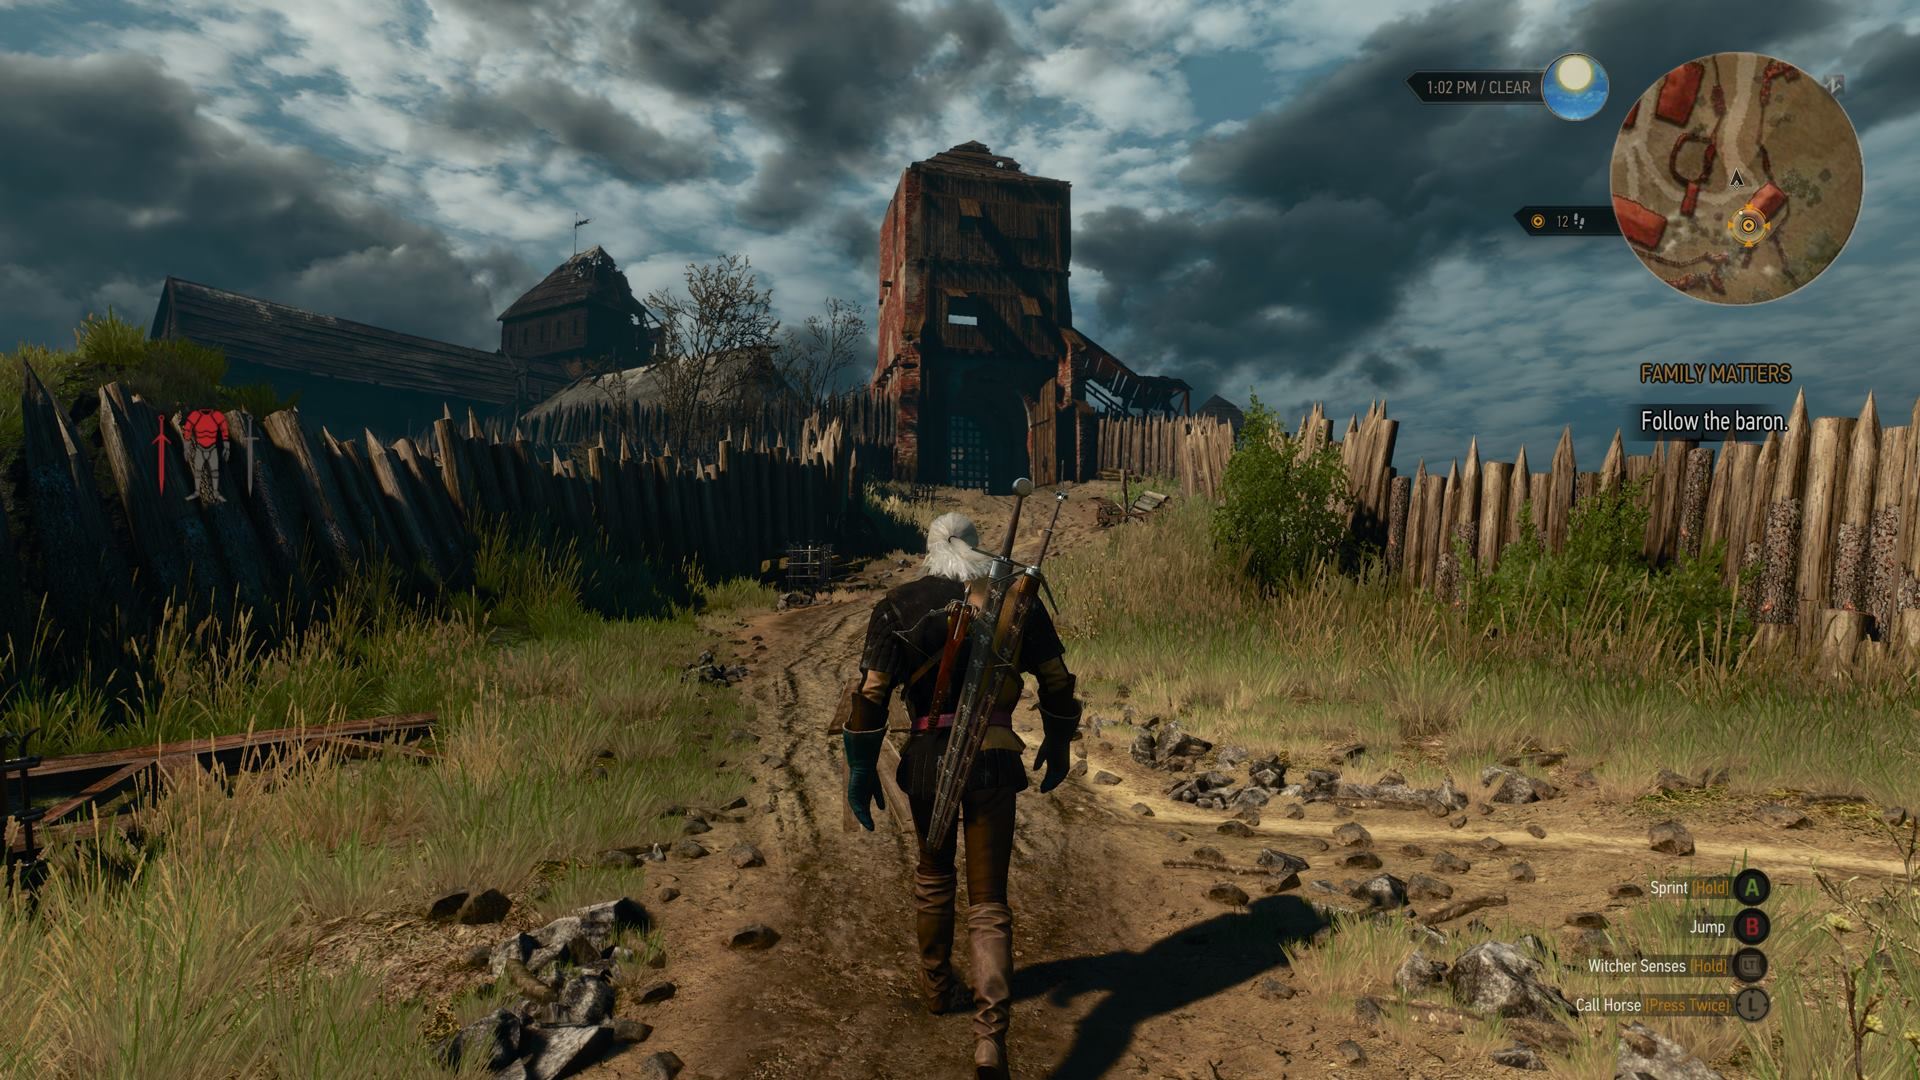 Witcher 3 Map Size Compared To Gta5 Skyrim Far Cry 4 New Screens Show Different Visual Settings